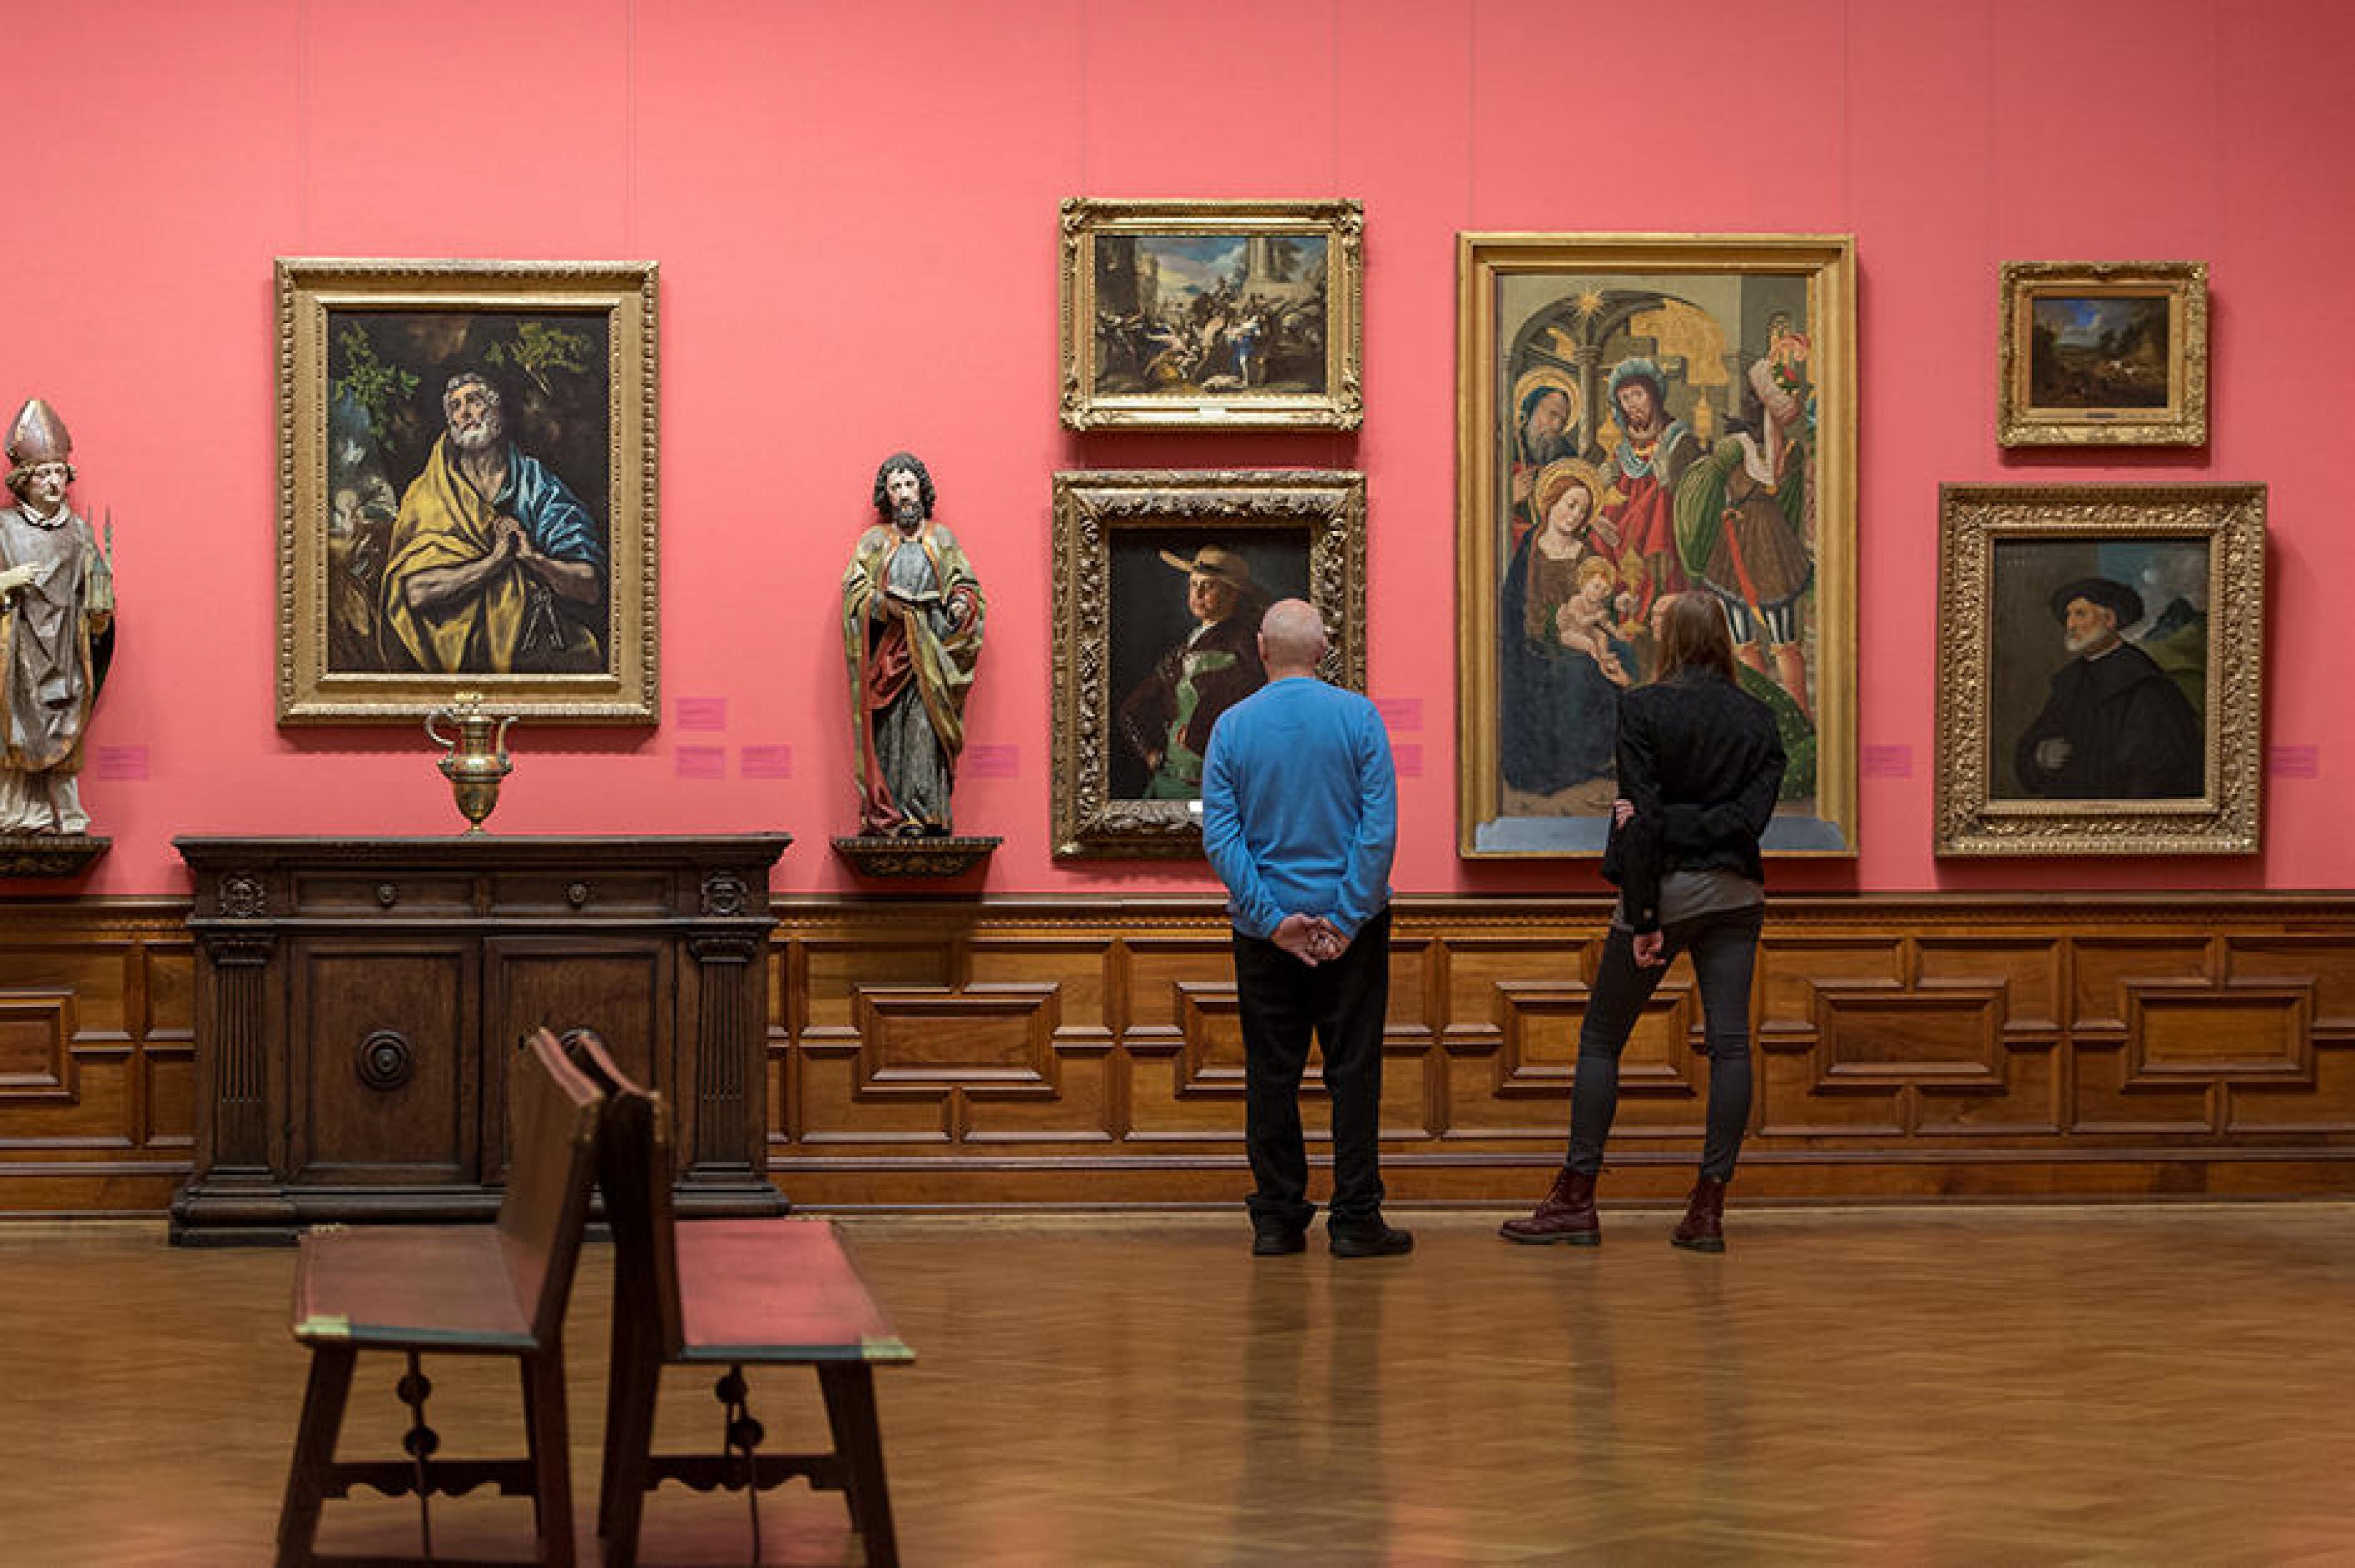 Interior view - The National Gallery, Oslo, Norway